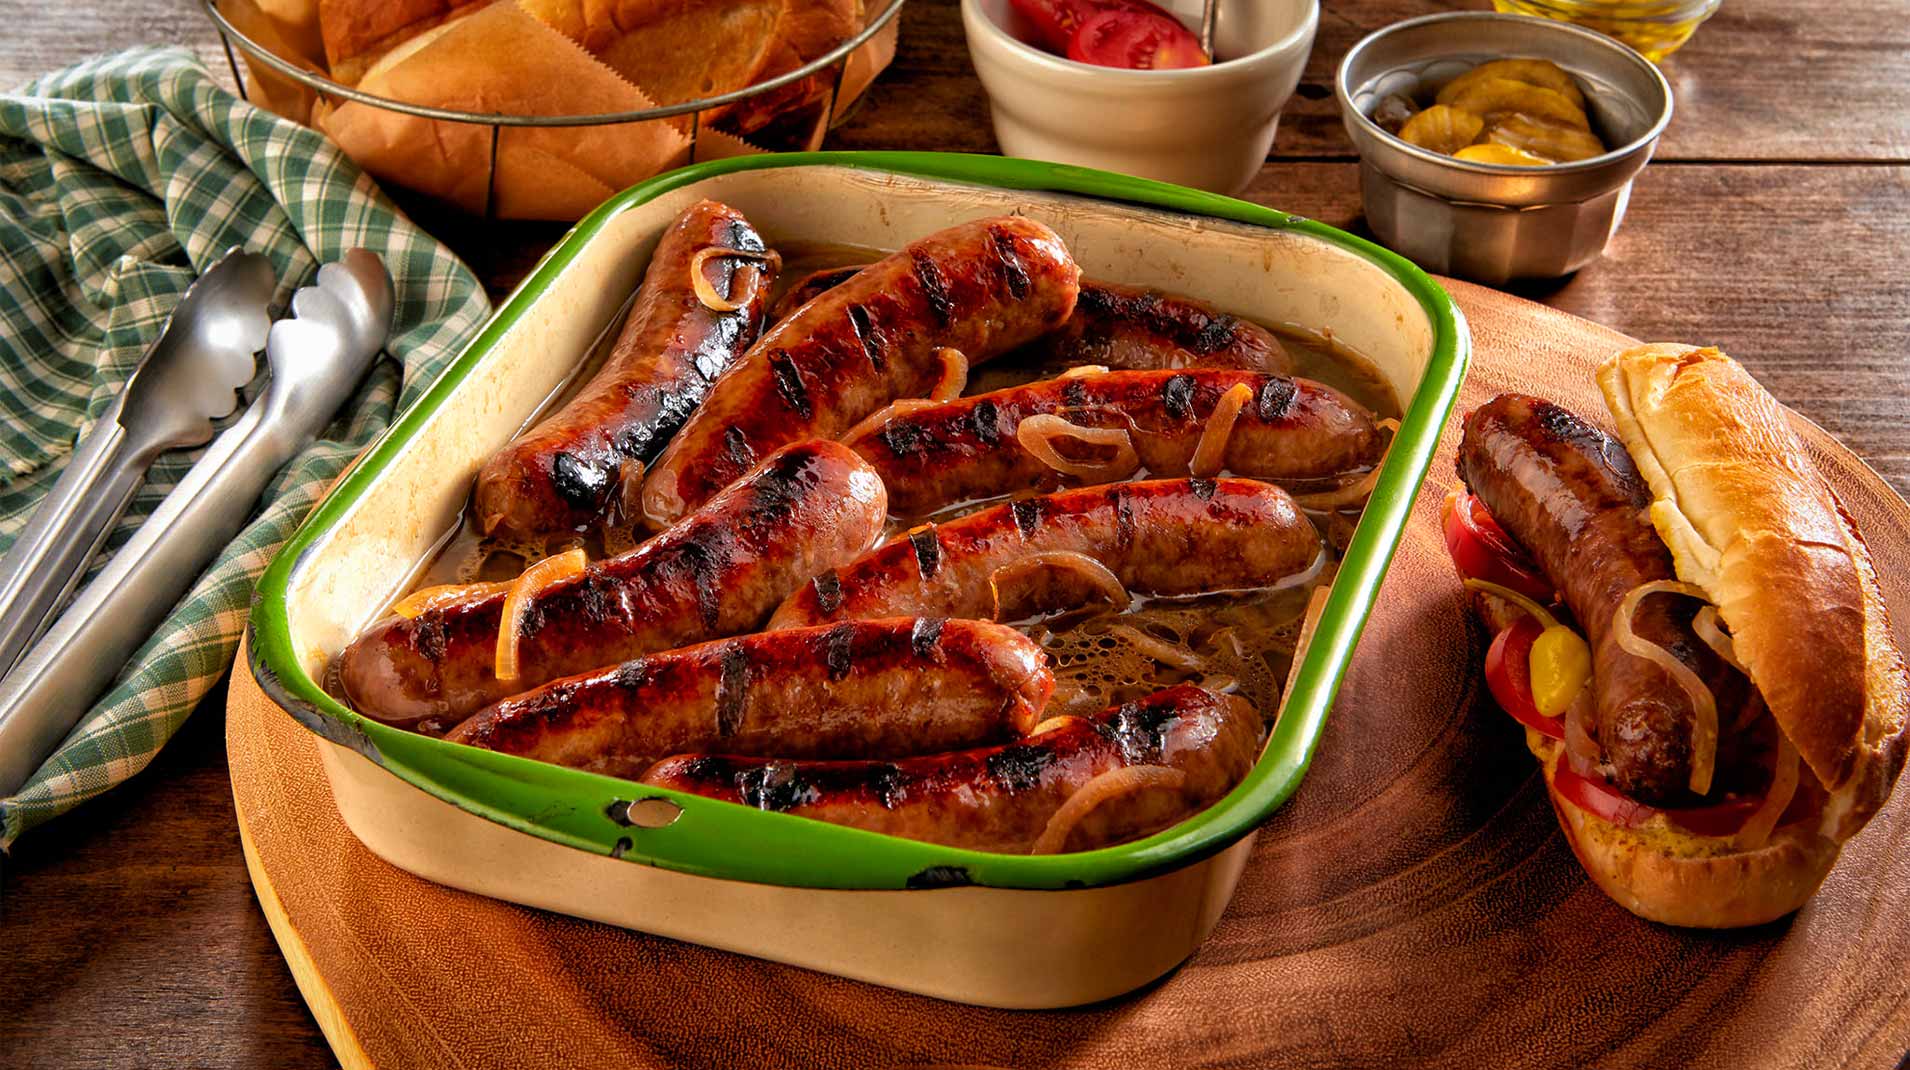 Johnsonville Sausages in a bowl